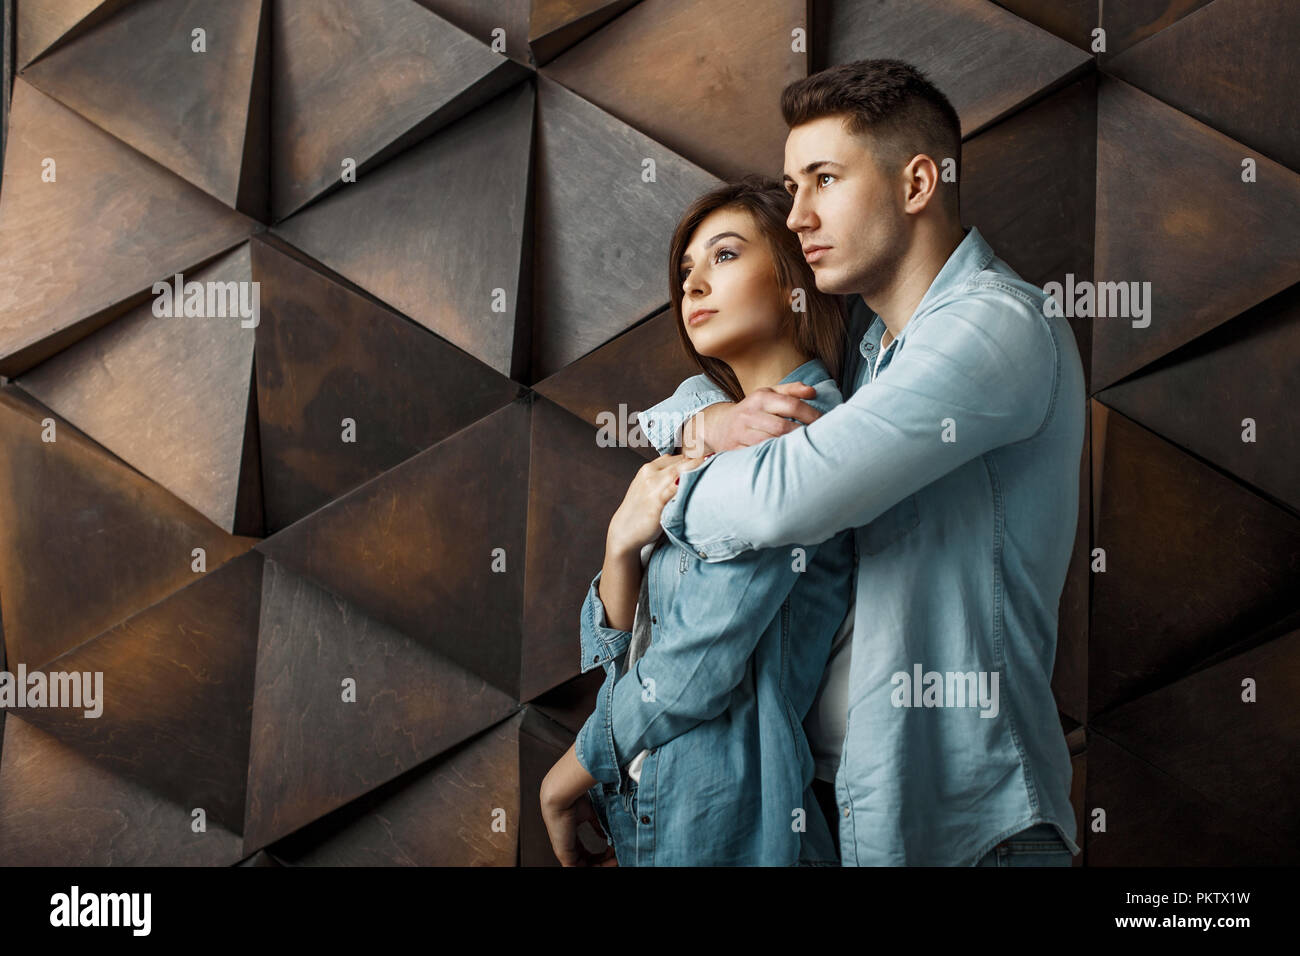 Stylish beautiful young couple in denim blue clothes near a wooden patterned wall Stock Photo